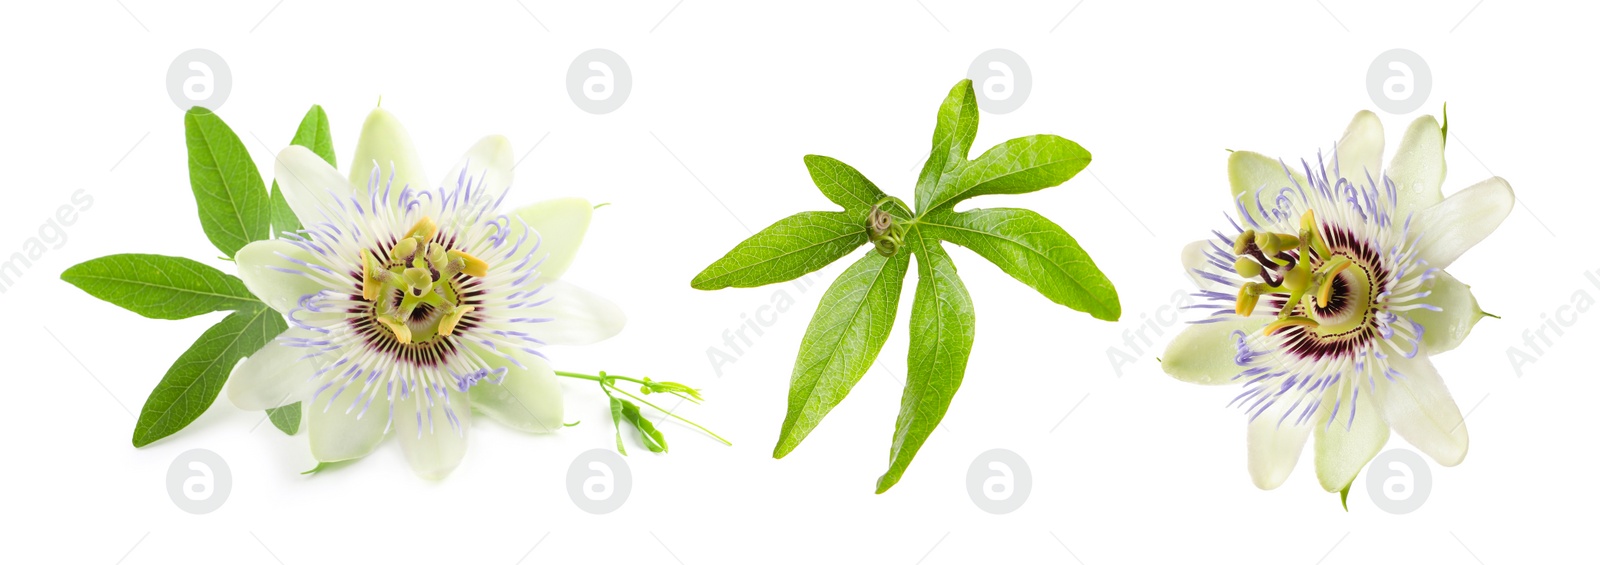 Image of Set with Passiflora plant (passion fruit) flowers and leaves on white background. Banner design